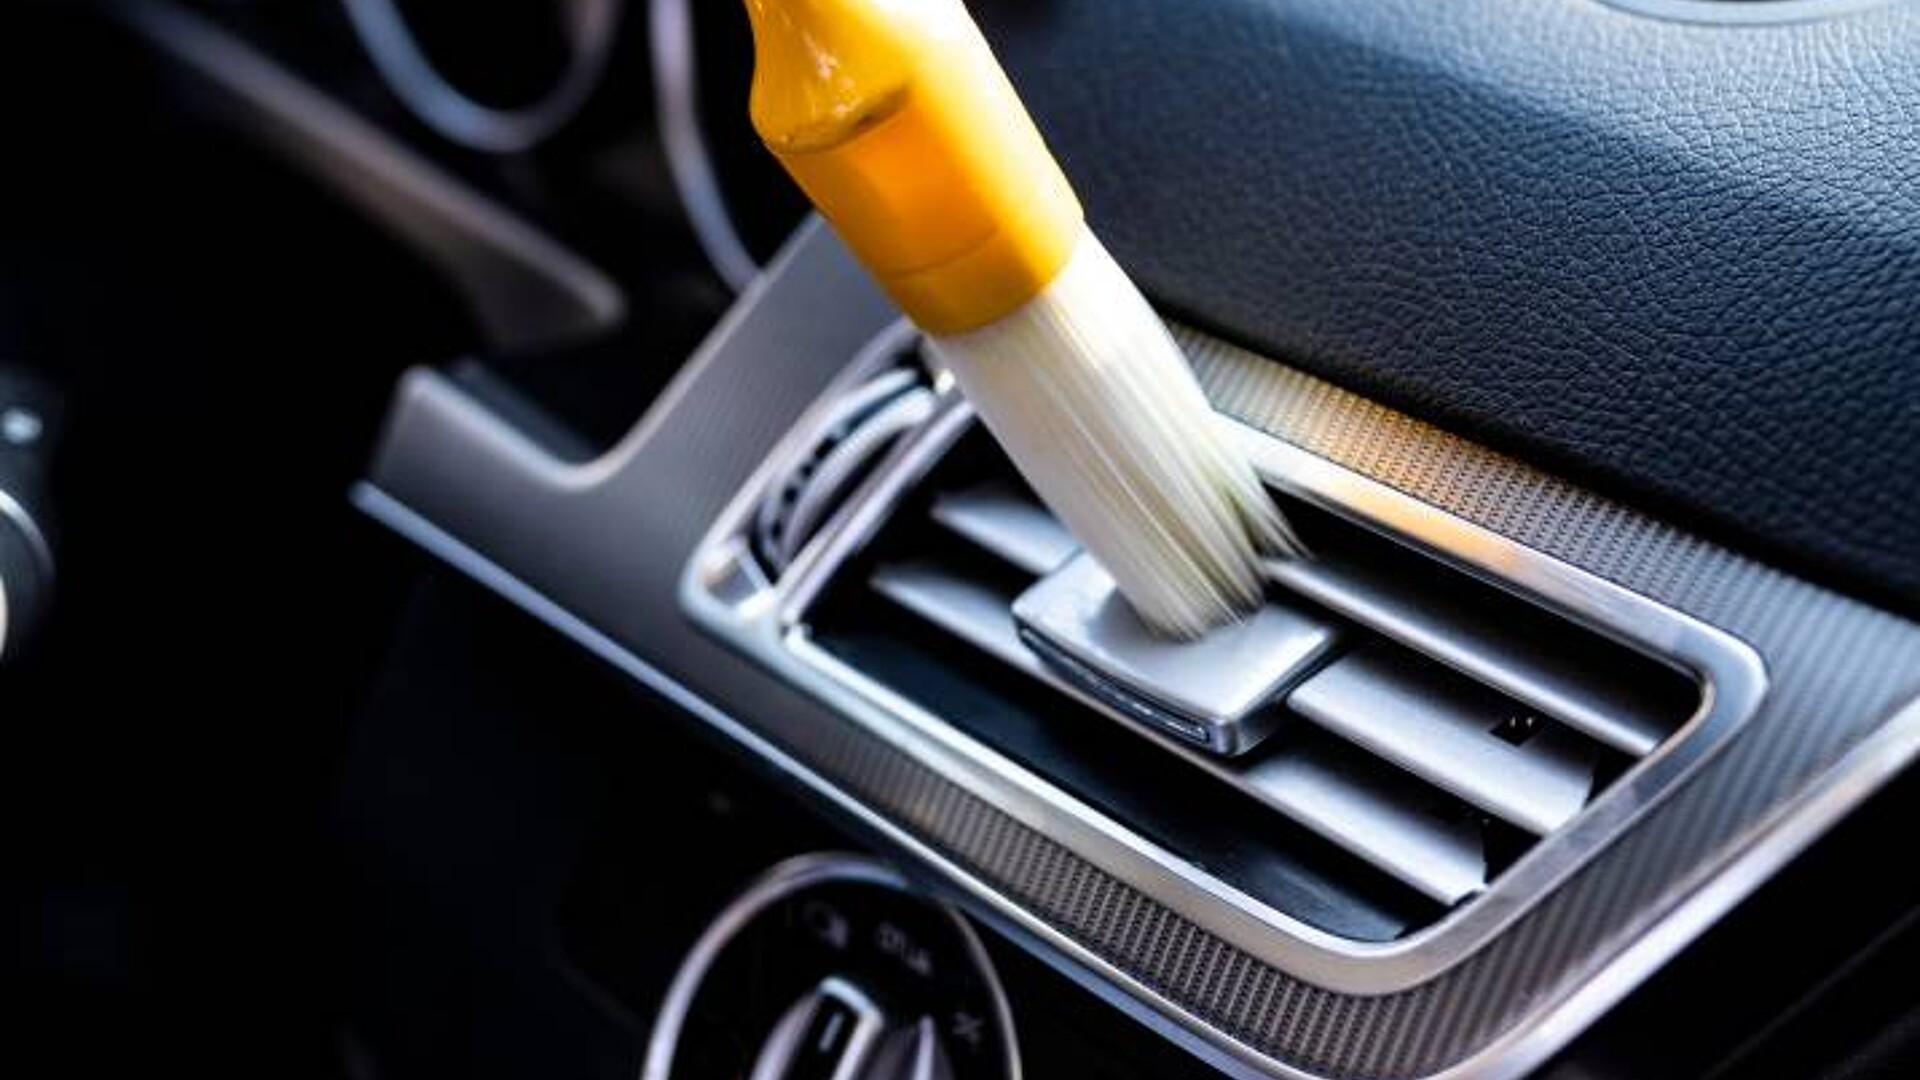 A Guide To Interior Car Detailing Like a Pro